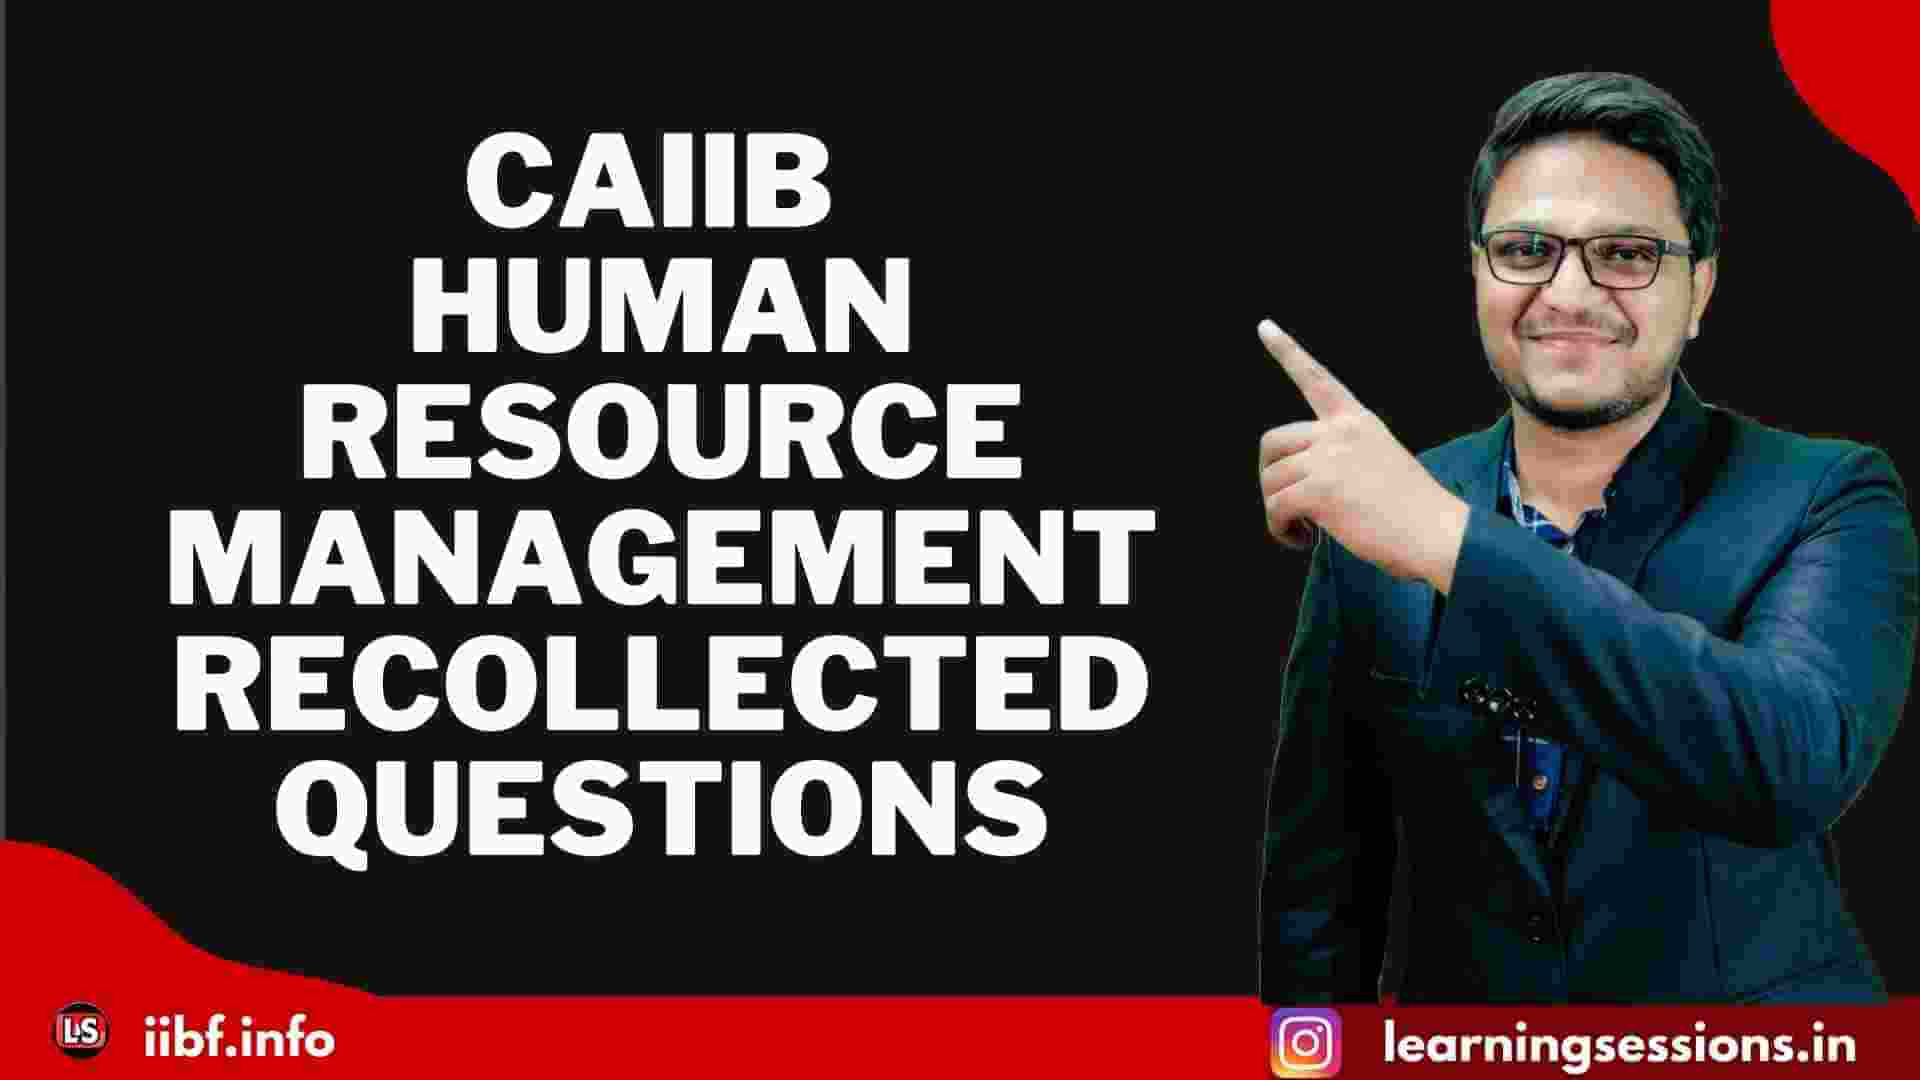 CAIIB HUMAN RESOURCE MANAGEMENT RECOLLECTED QUESTIONS